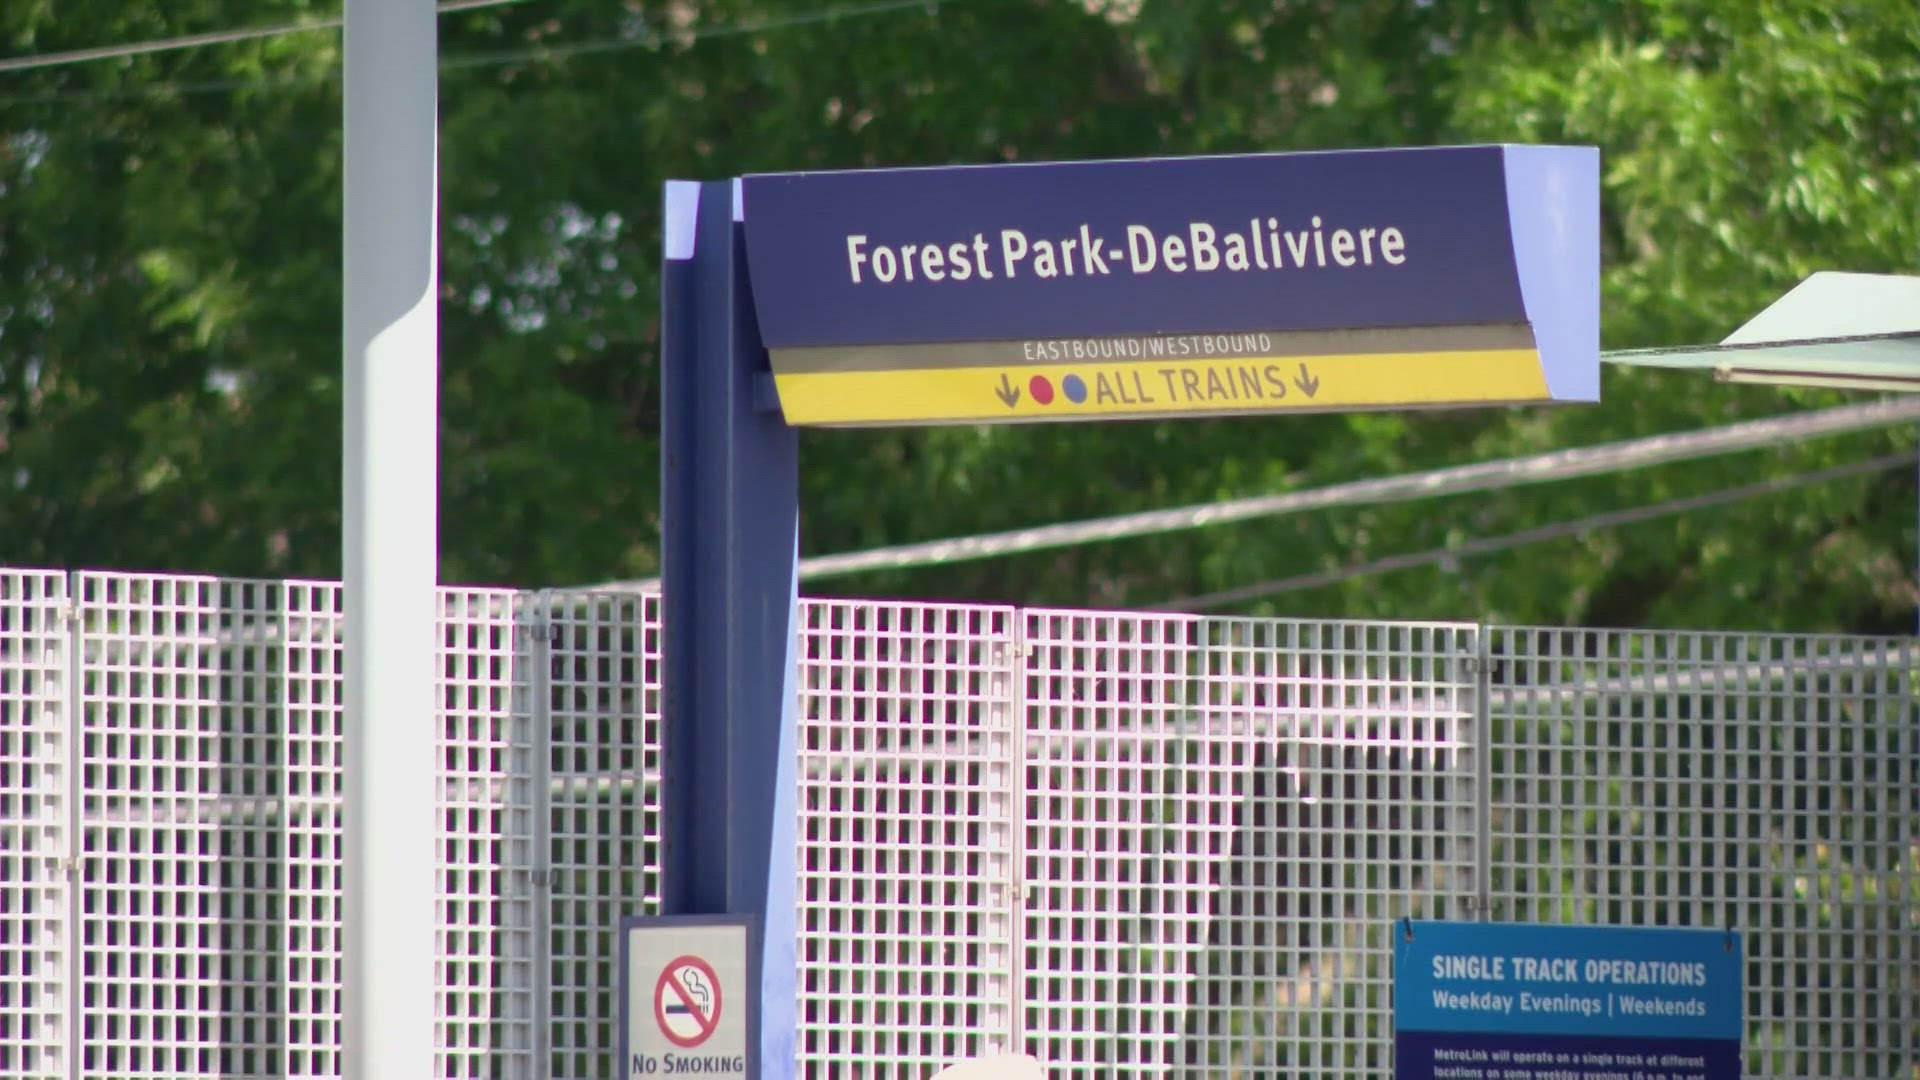 A woman was shot and killed Saturday afternoon at the Forest Park-DeBaliviere MetroLink station. A 17-year-old was arrested in connection with the killing.